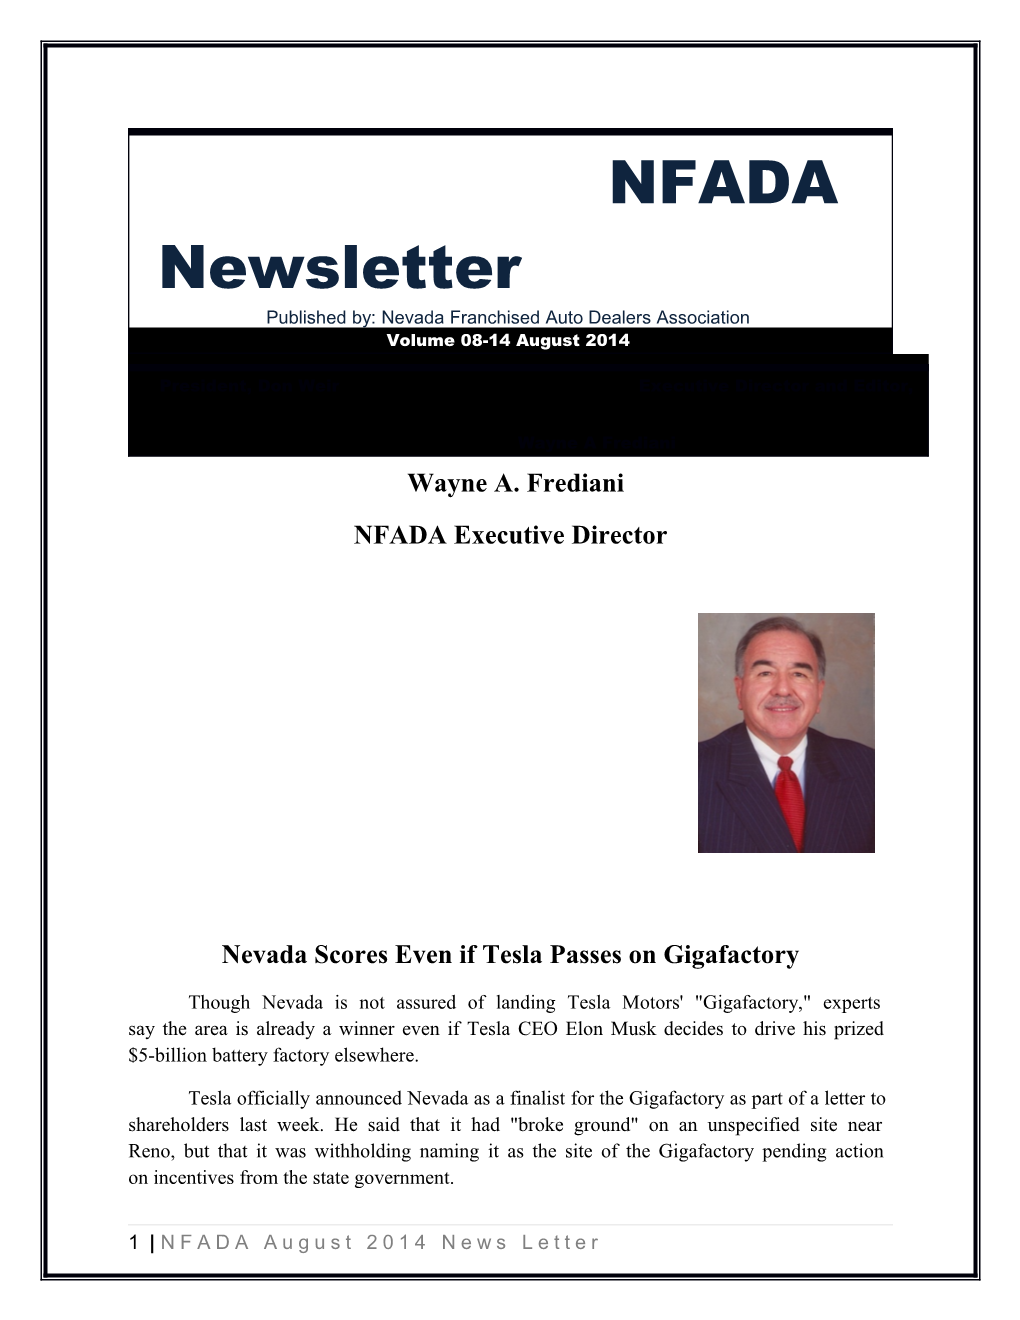 Published By: Nevada Franchised Auto Dealers Association